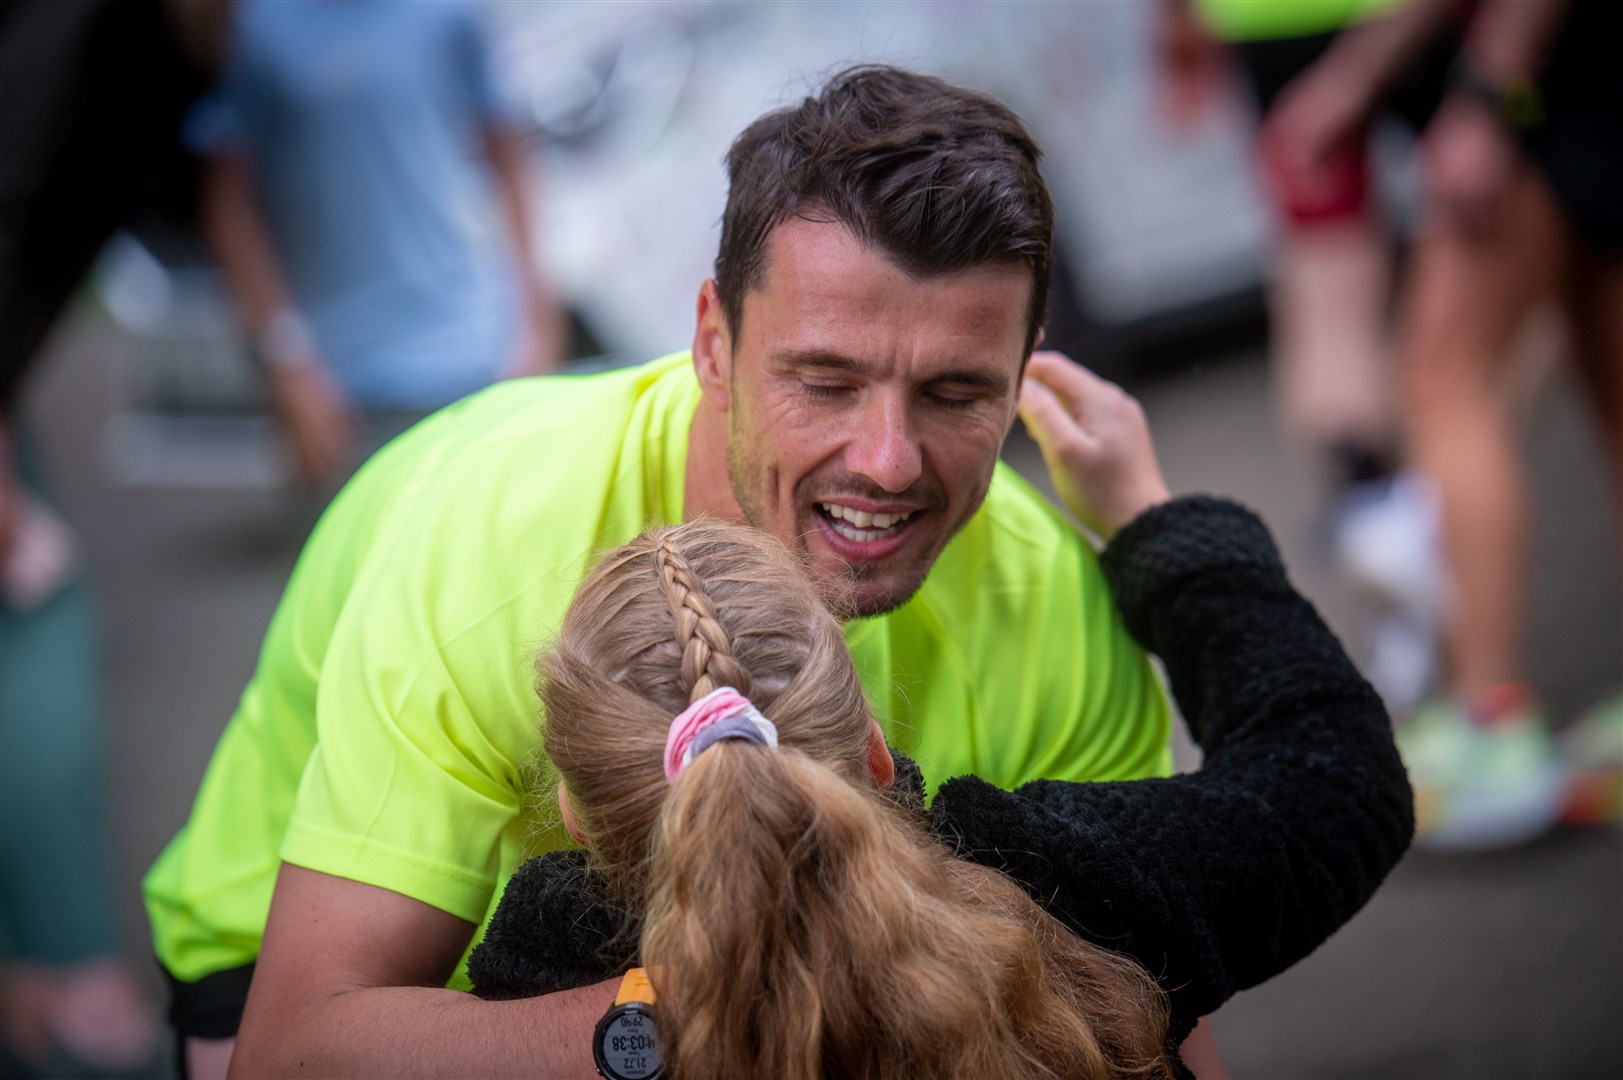 Pebbles Sawyer who joined Steven Mackay on one of the sections was at the finish line to congratulate him. Picture: Callum Mackay